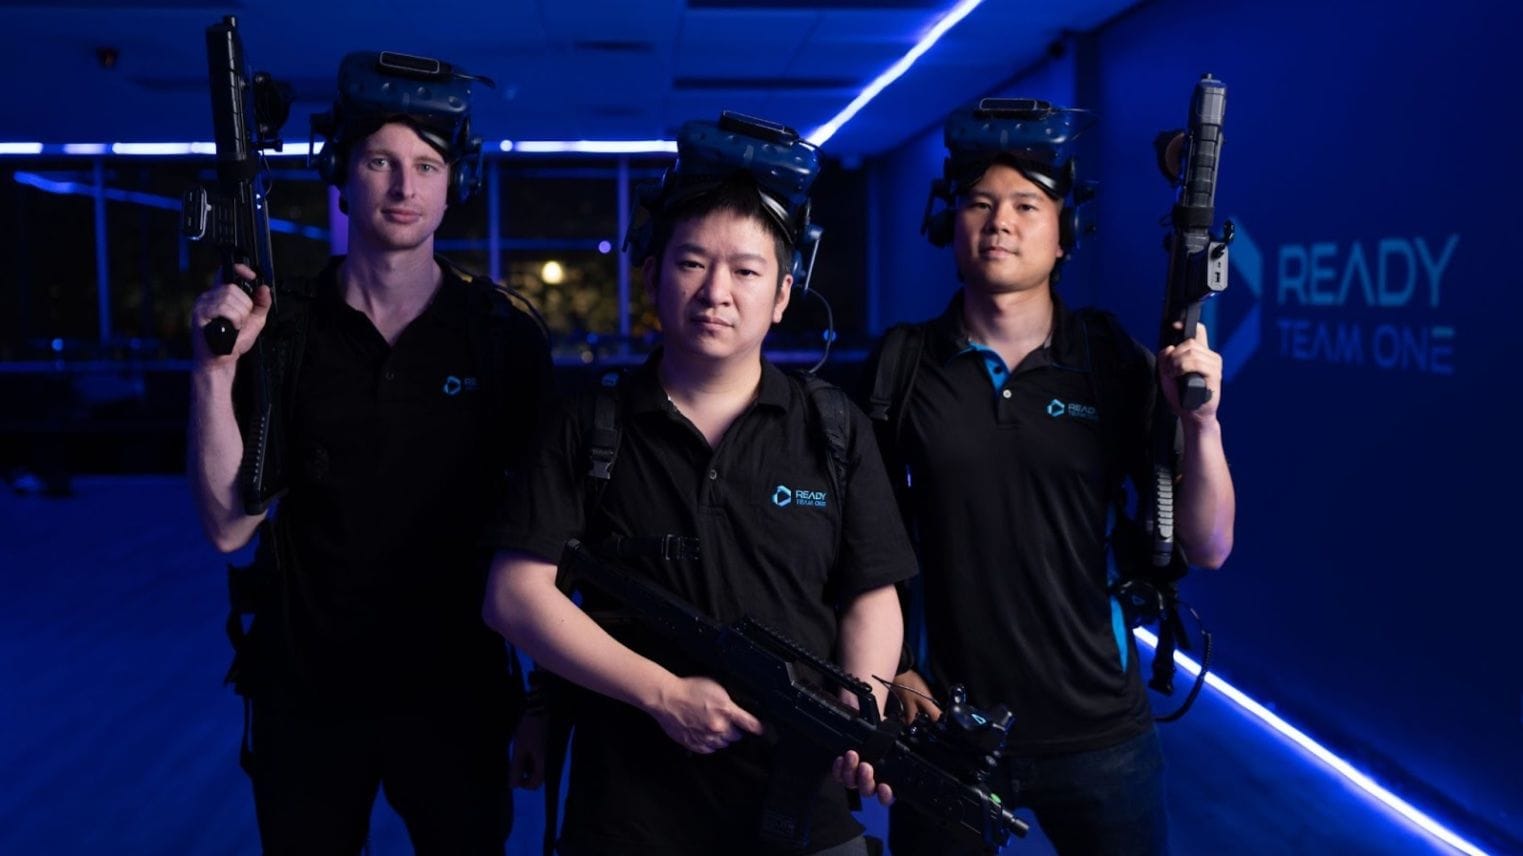 Perth-based virtual gaming startup Ready Team One enters Europe